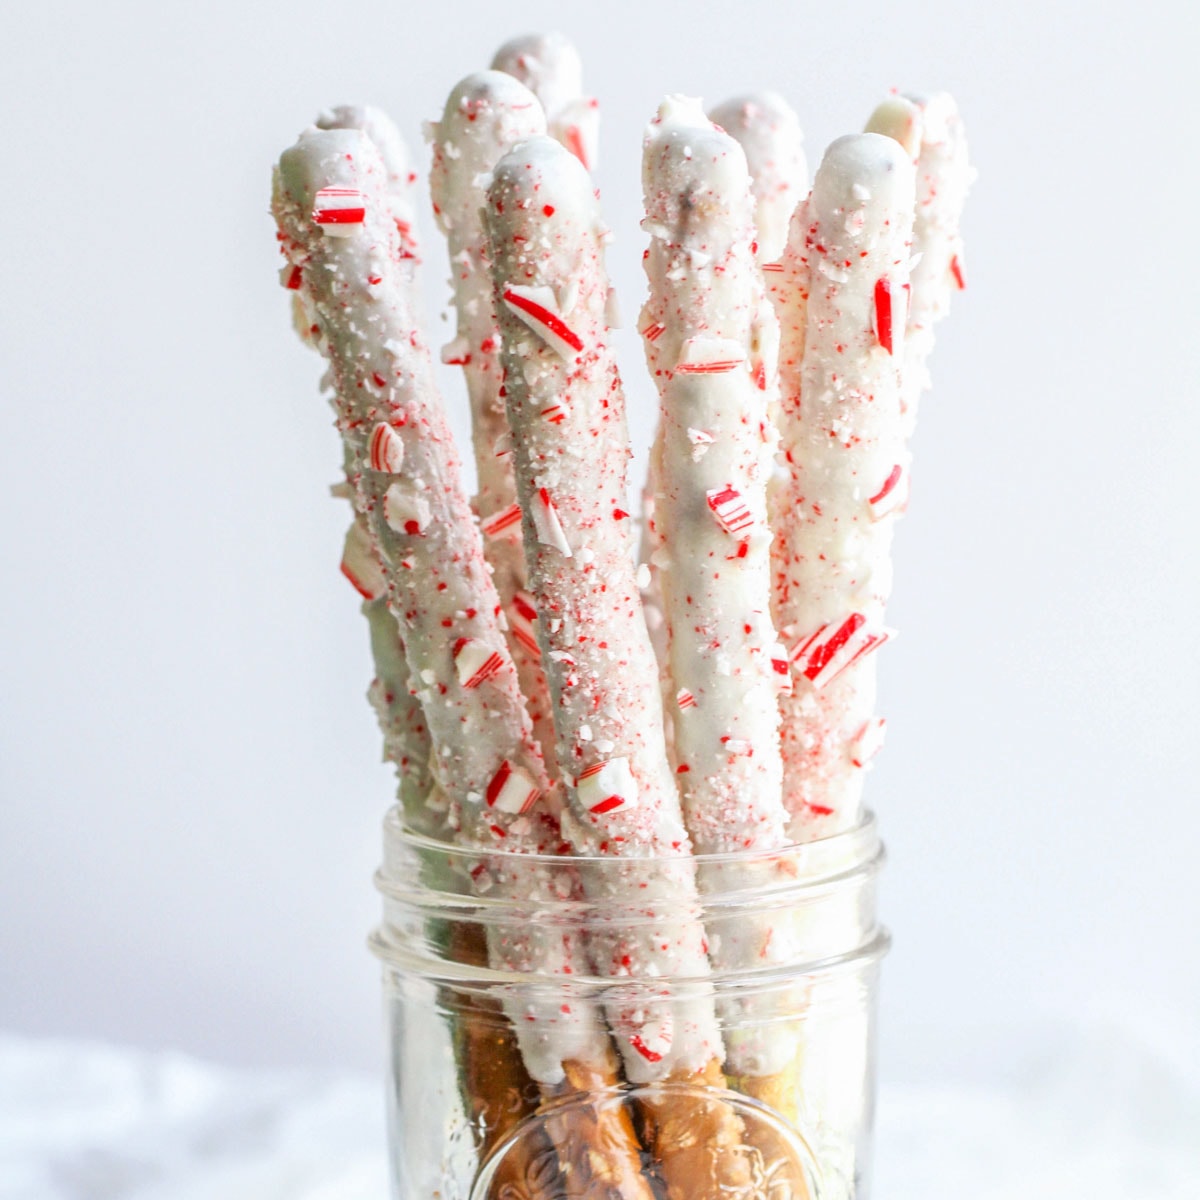 White Chocolate Peppermint Pretzels placed in a glass mason jar.